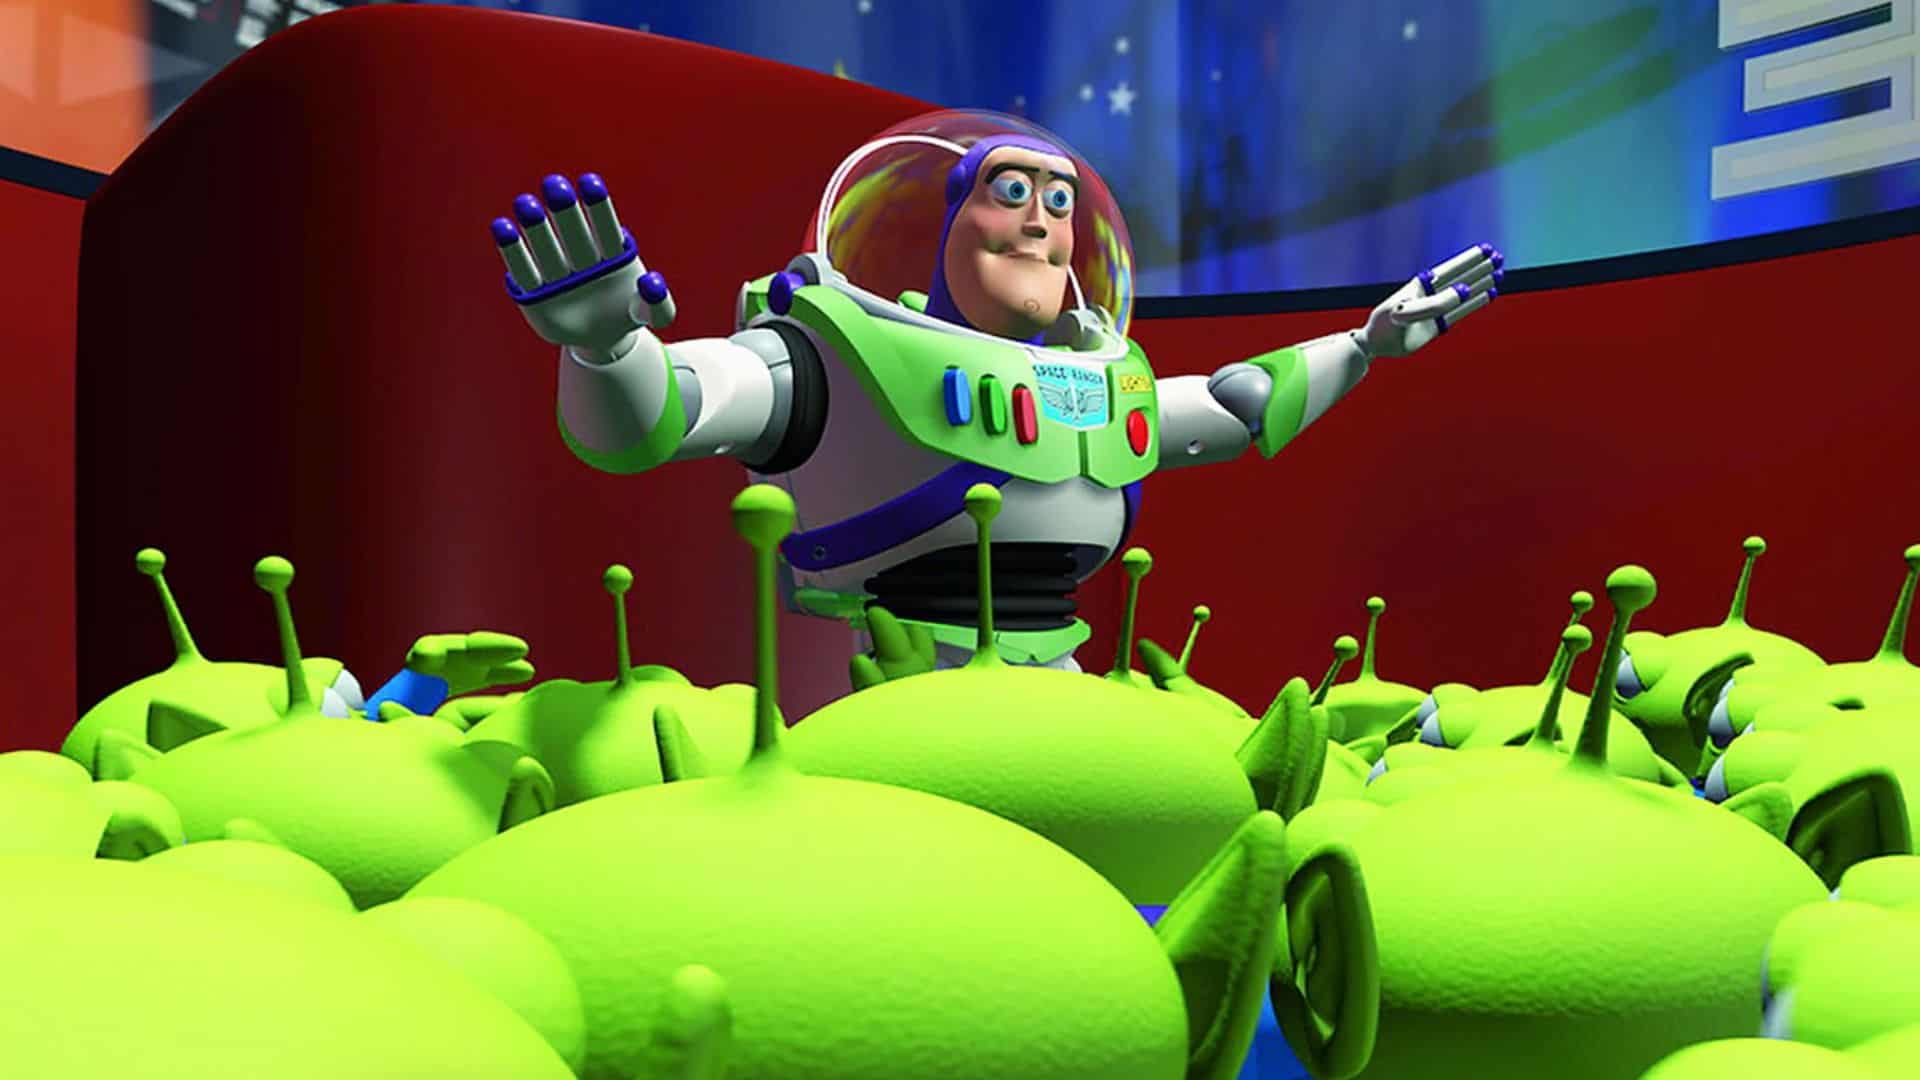 Buzz Lightyear with the aliens in this image from Pixar.